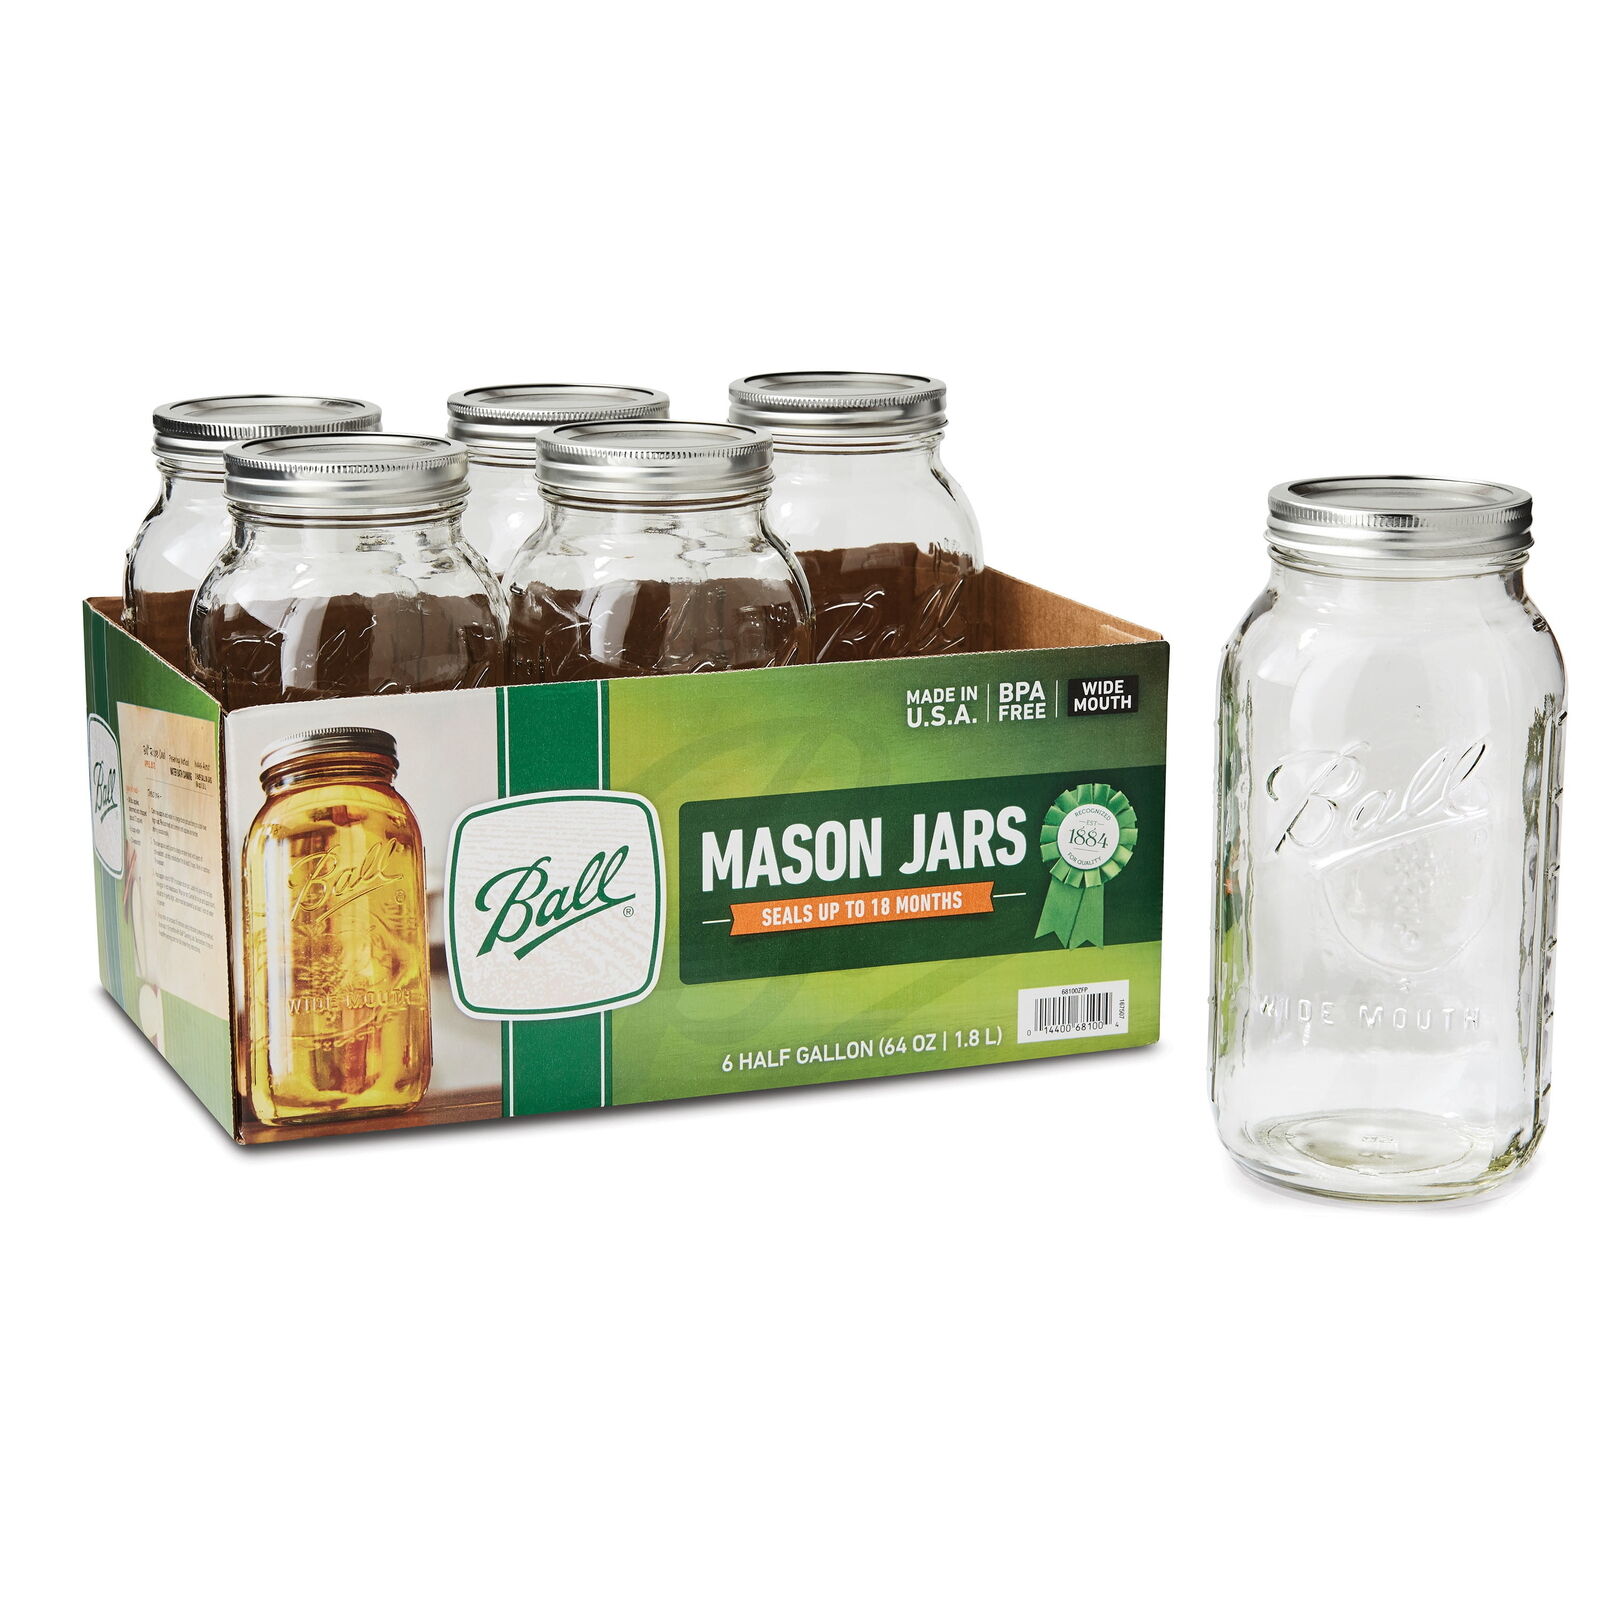  Wide Mouth 64oz Half Gallon Mason Jars with Lids & Bands, 6 Count